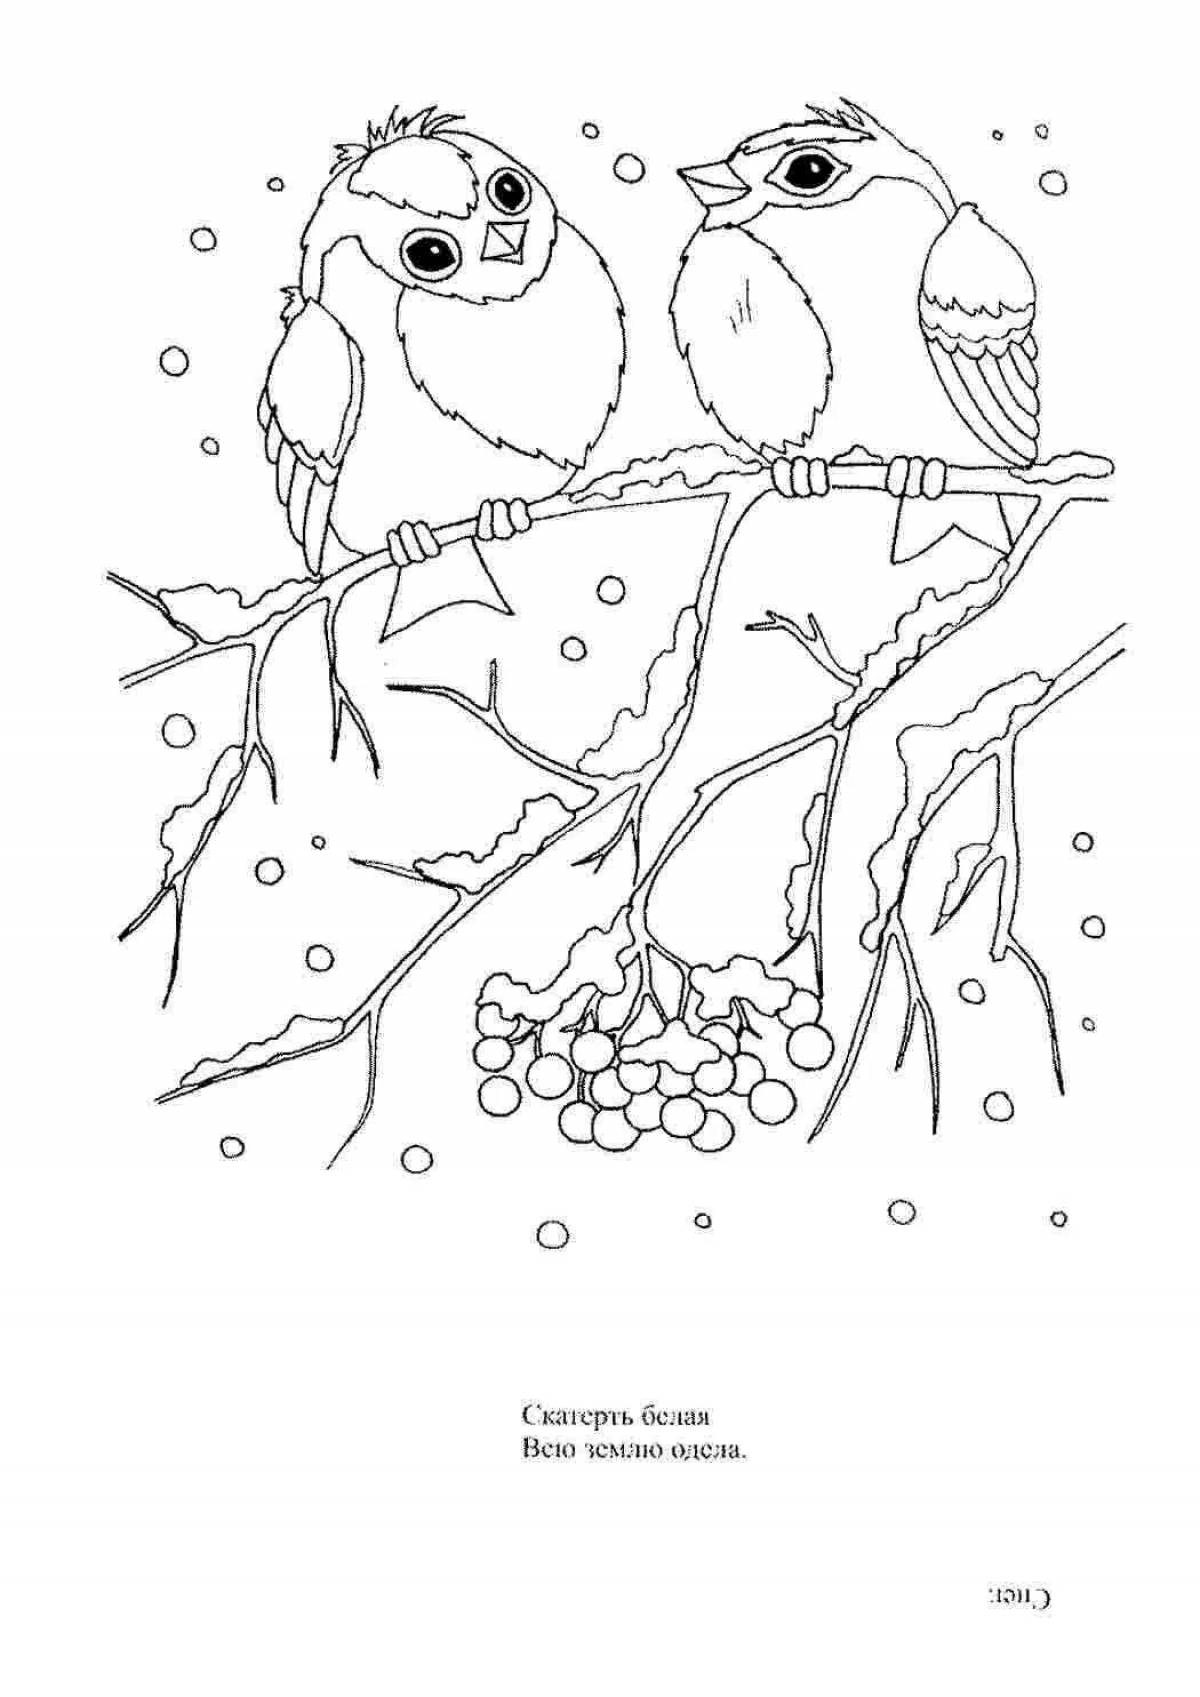 Coloring pages of joyful winter birds for children 6-7 years old